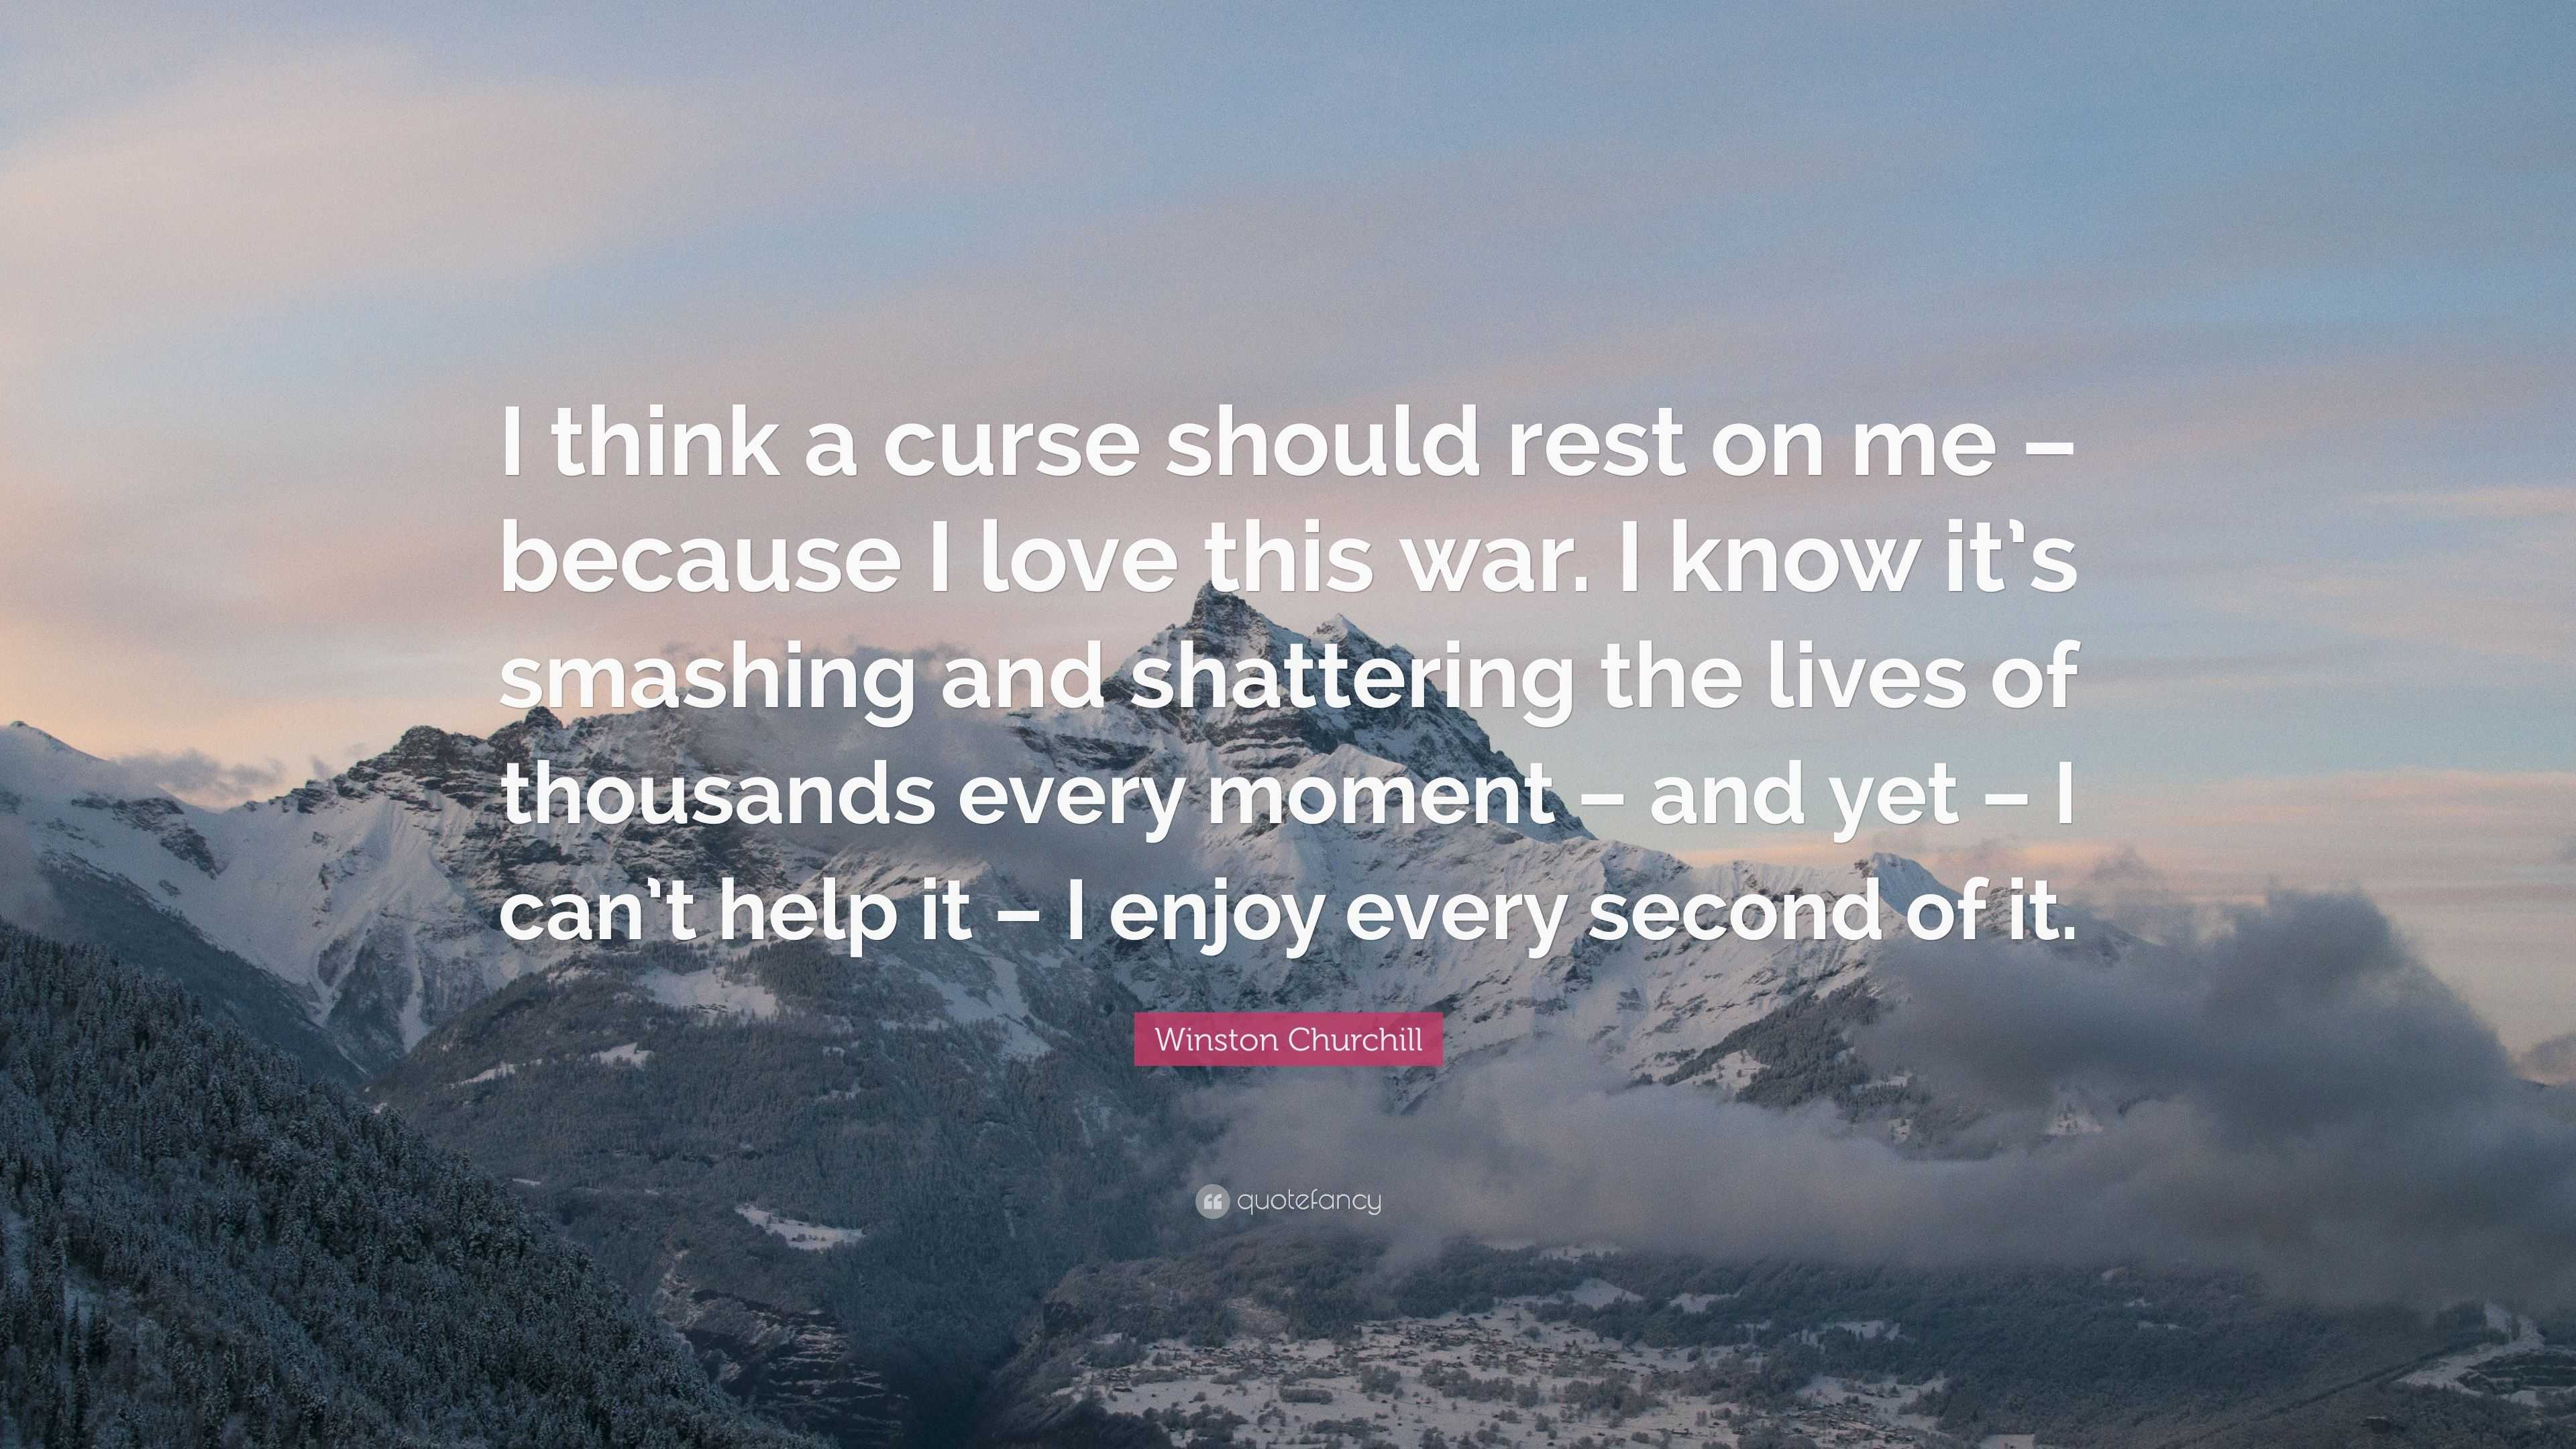 Winston Churchill Quote: “I think a curse should rest on me – because I ...